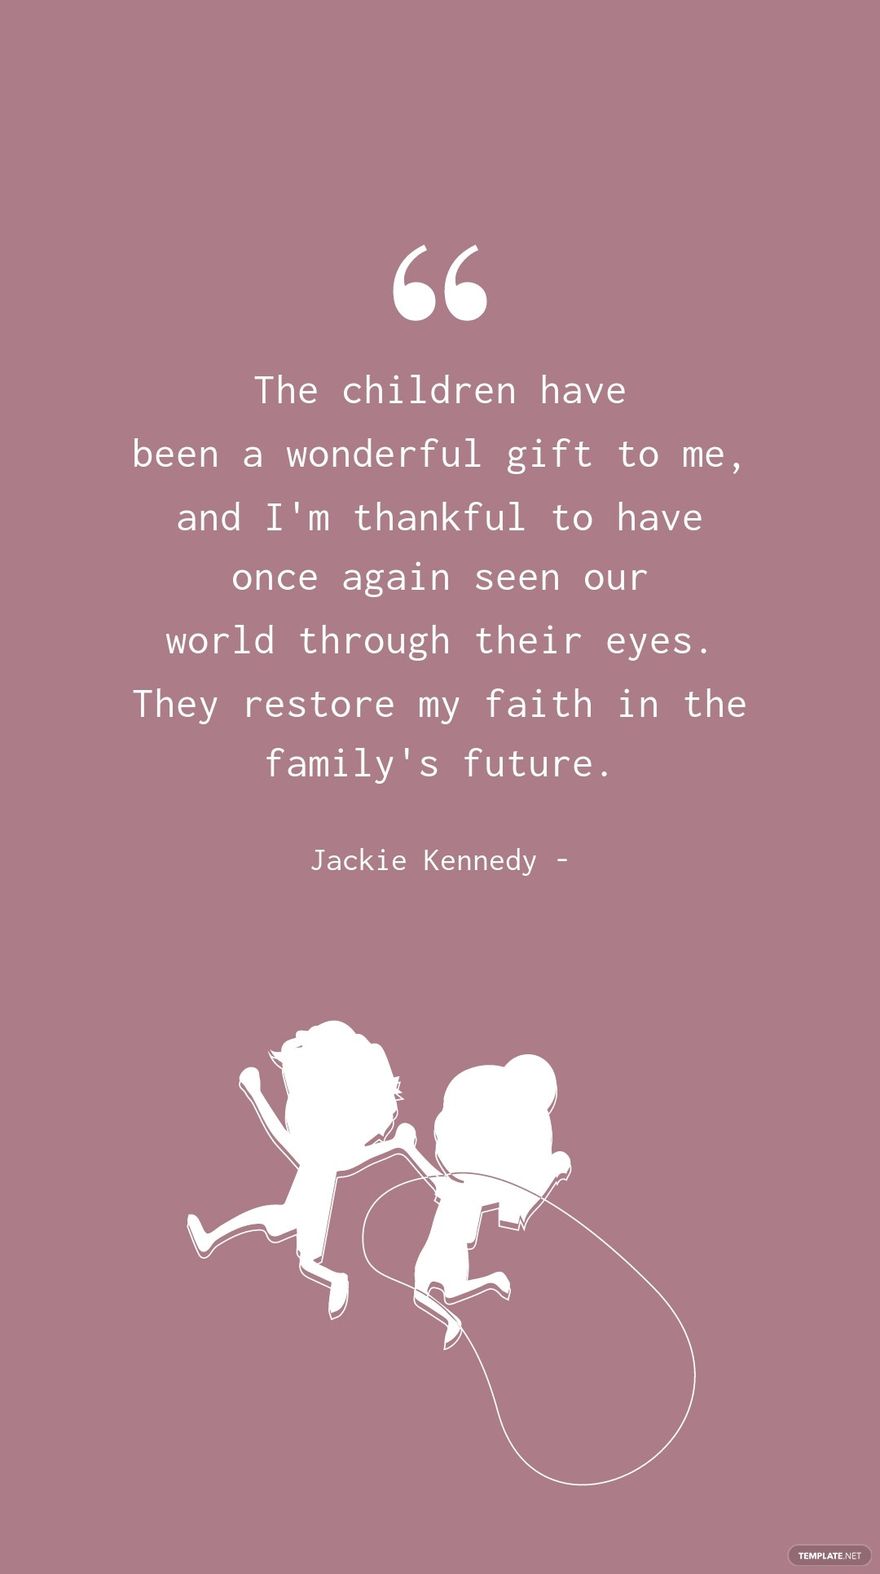 Jackie Kennedy - The children have been a wonderful gift to me, and I'm thankful to have once again seen our world through their eyes. They restore my faith in the family's future.